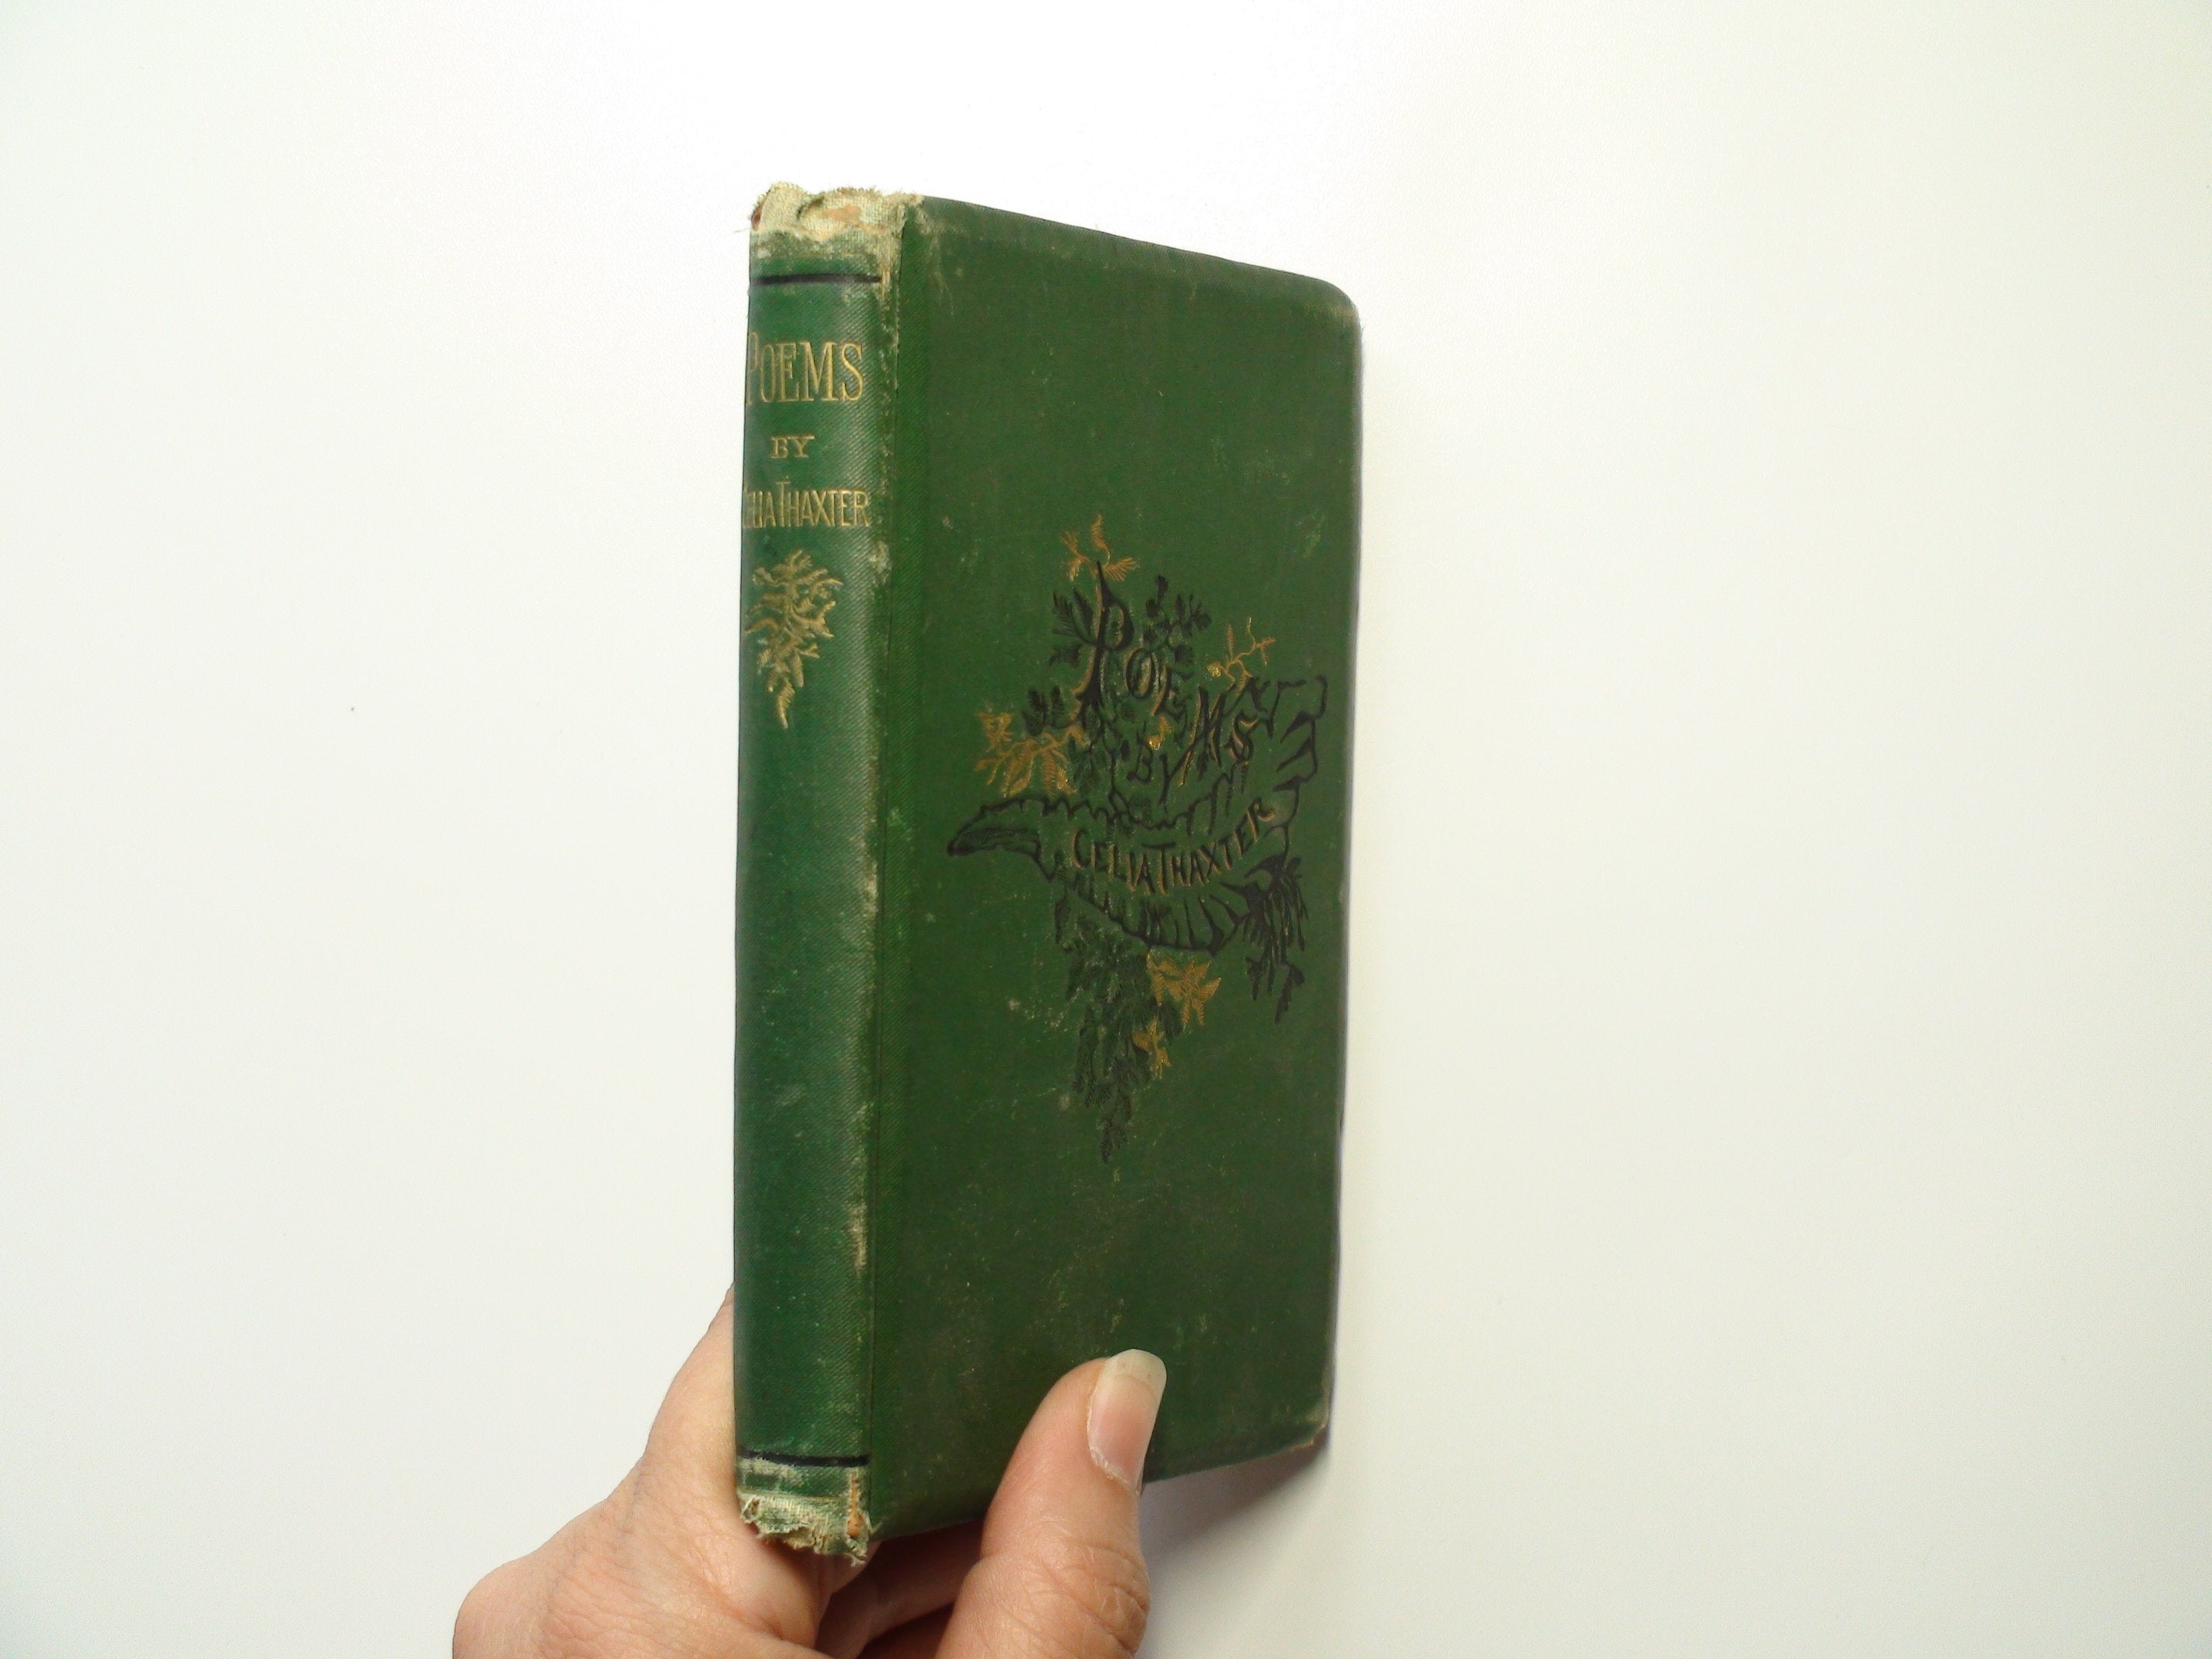 Poems By Celia Thaxter, New and Enlarged Edition, Rare, 1877